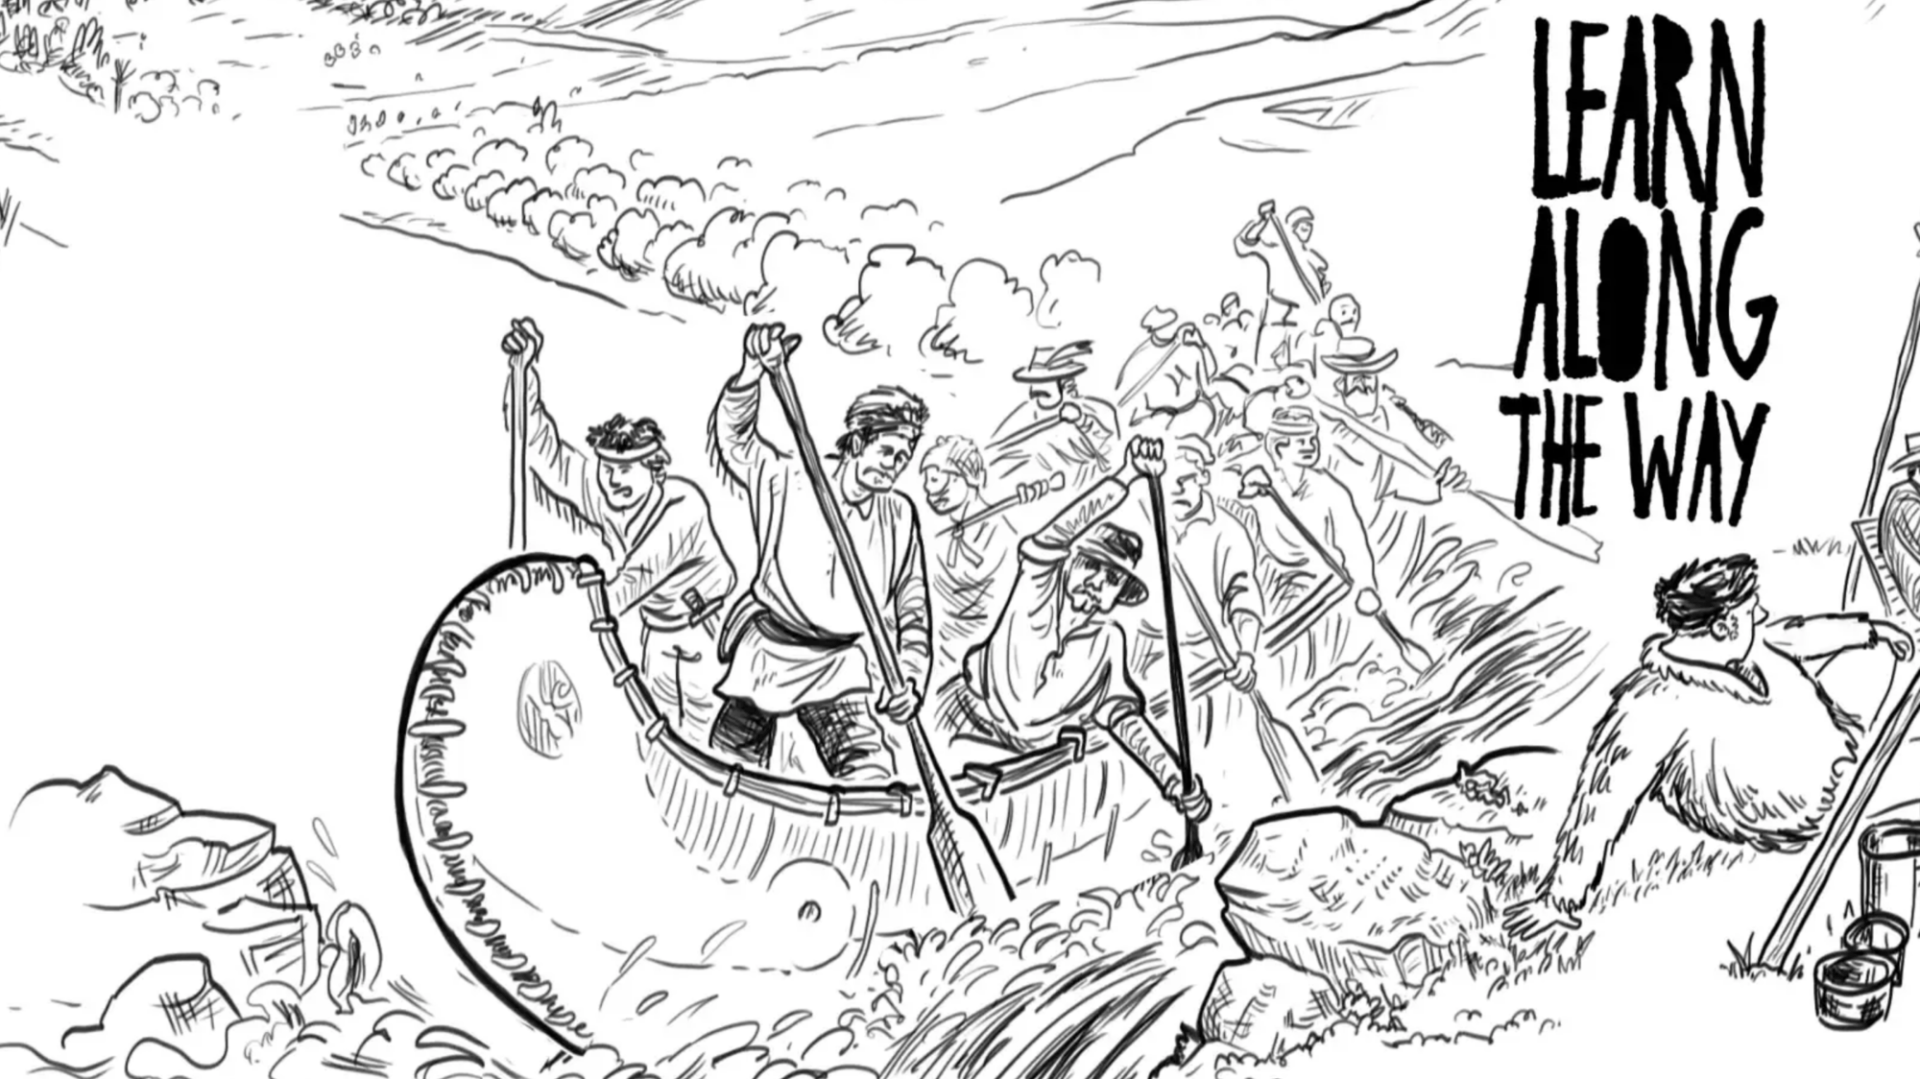 A drawing of people rowing a boat